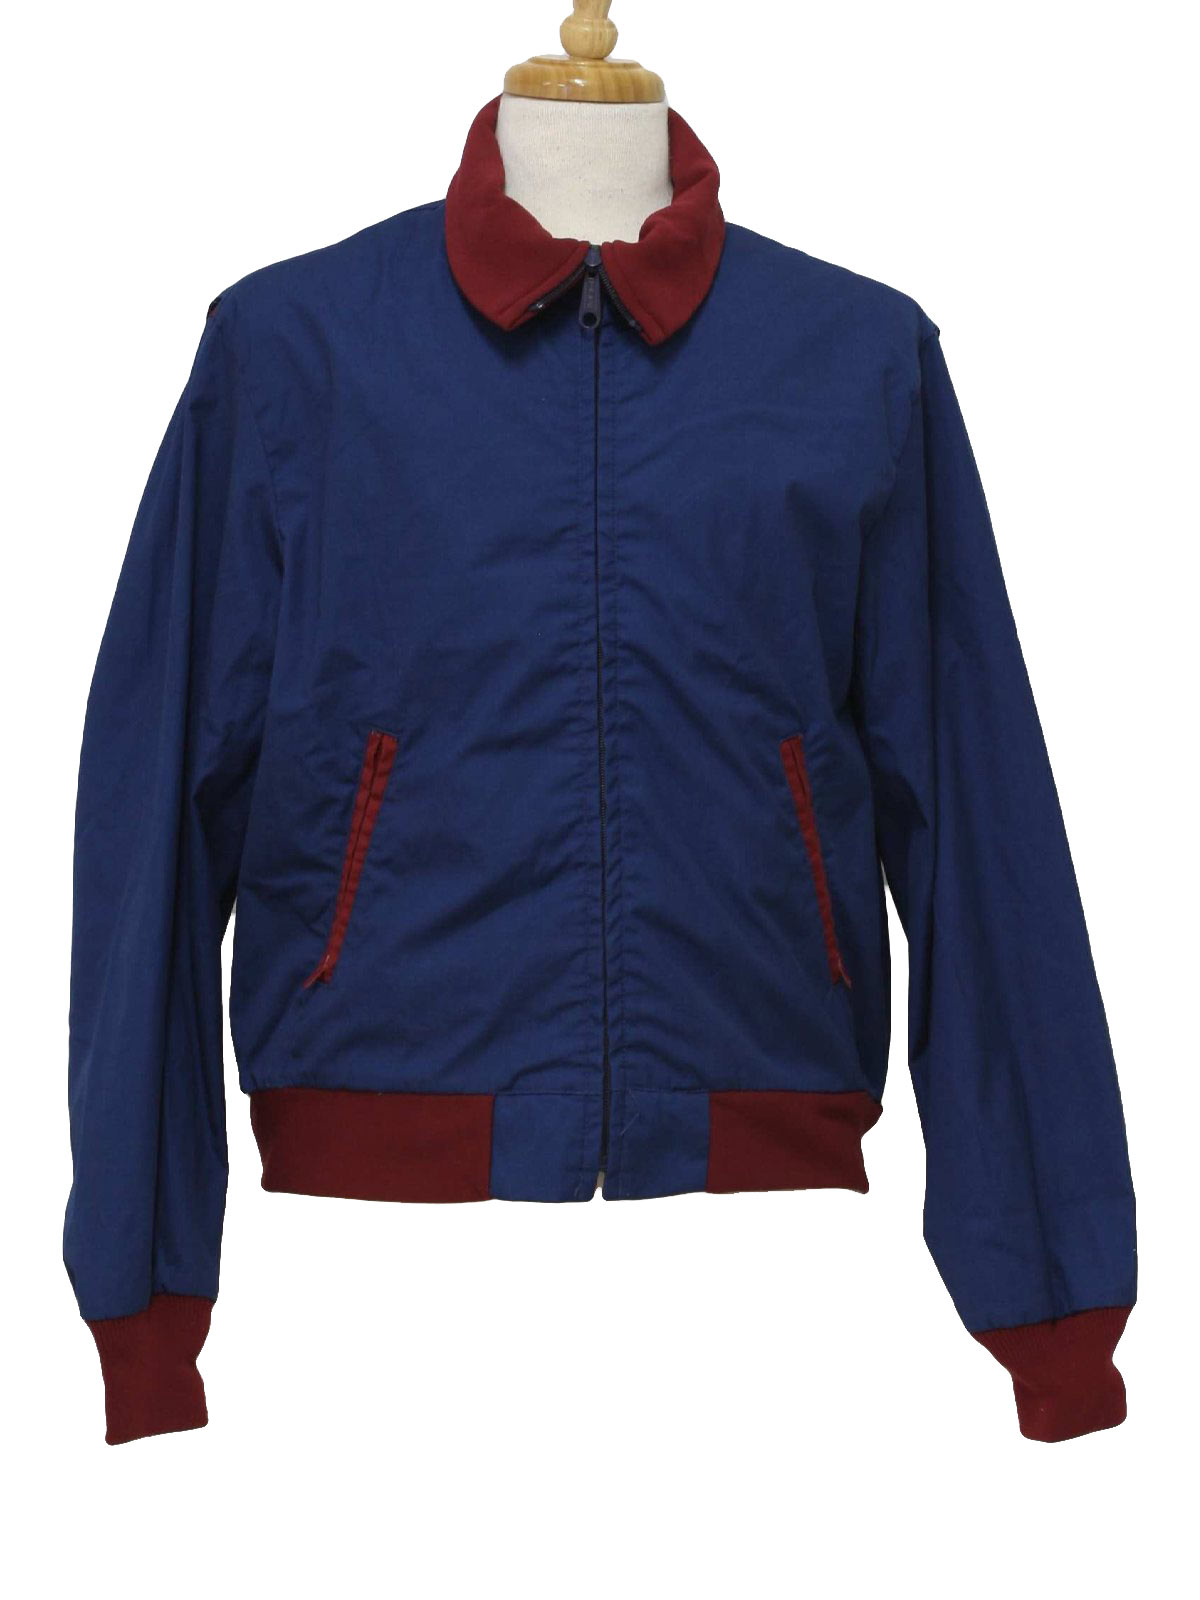 Woolrich 1980s Vintage Jacket: 80s -Woolrich- Mens navy and wine cotton ...